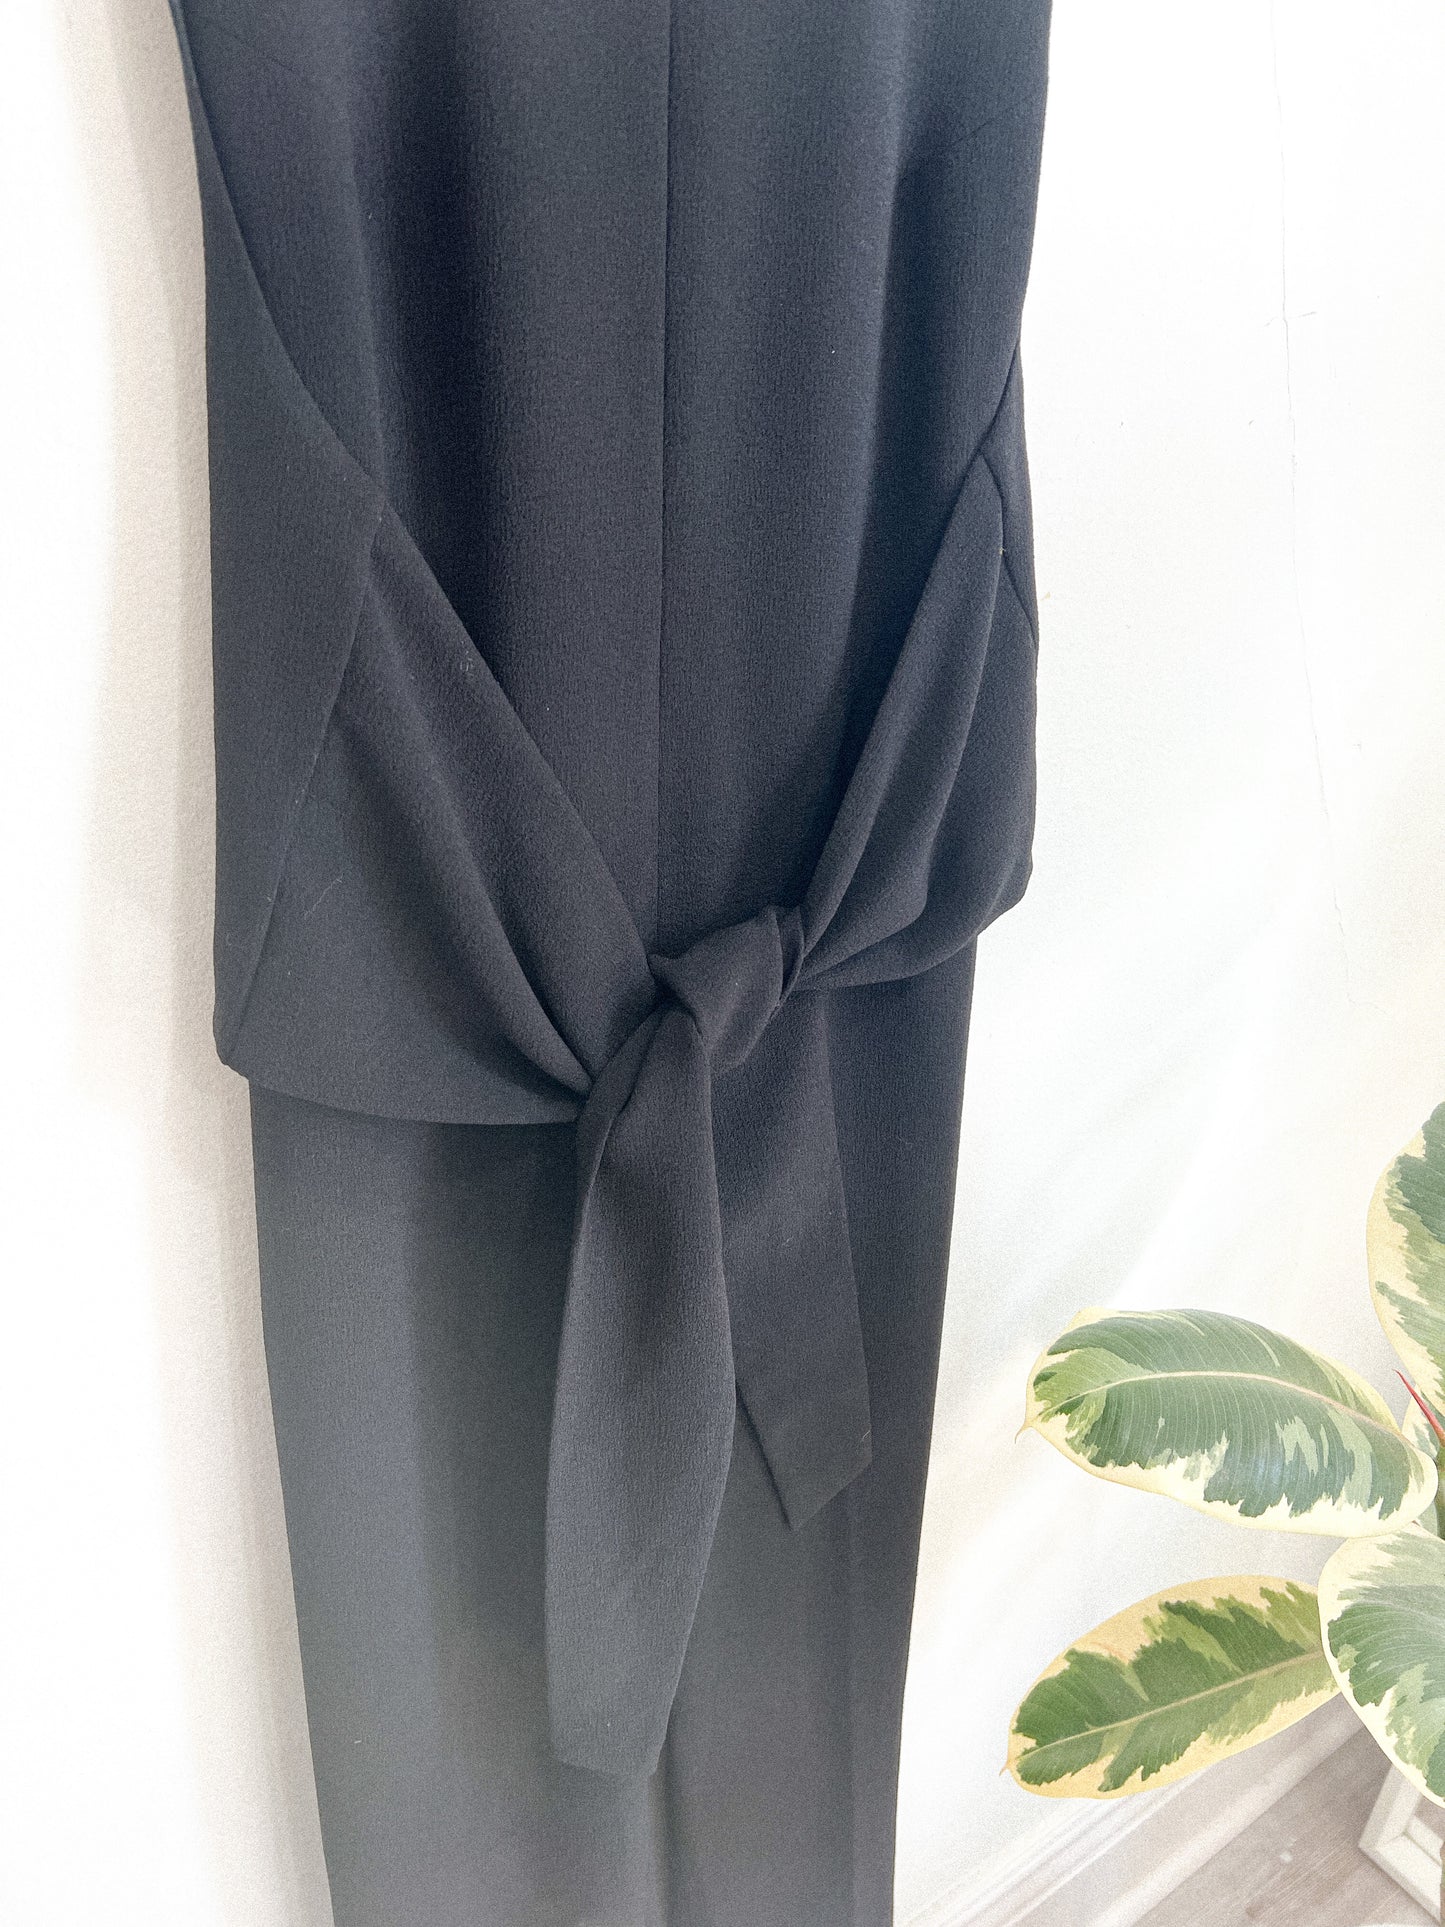 Club Monaco Black Sleeveless Jumpsuit with Front Tie (Size 2)